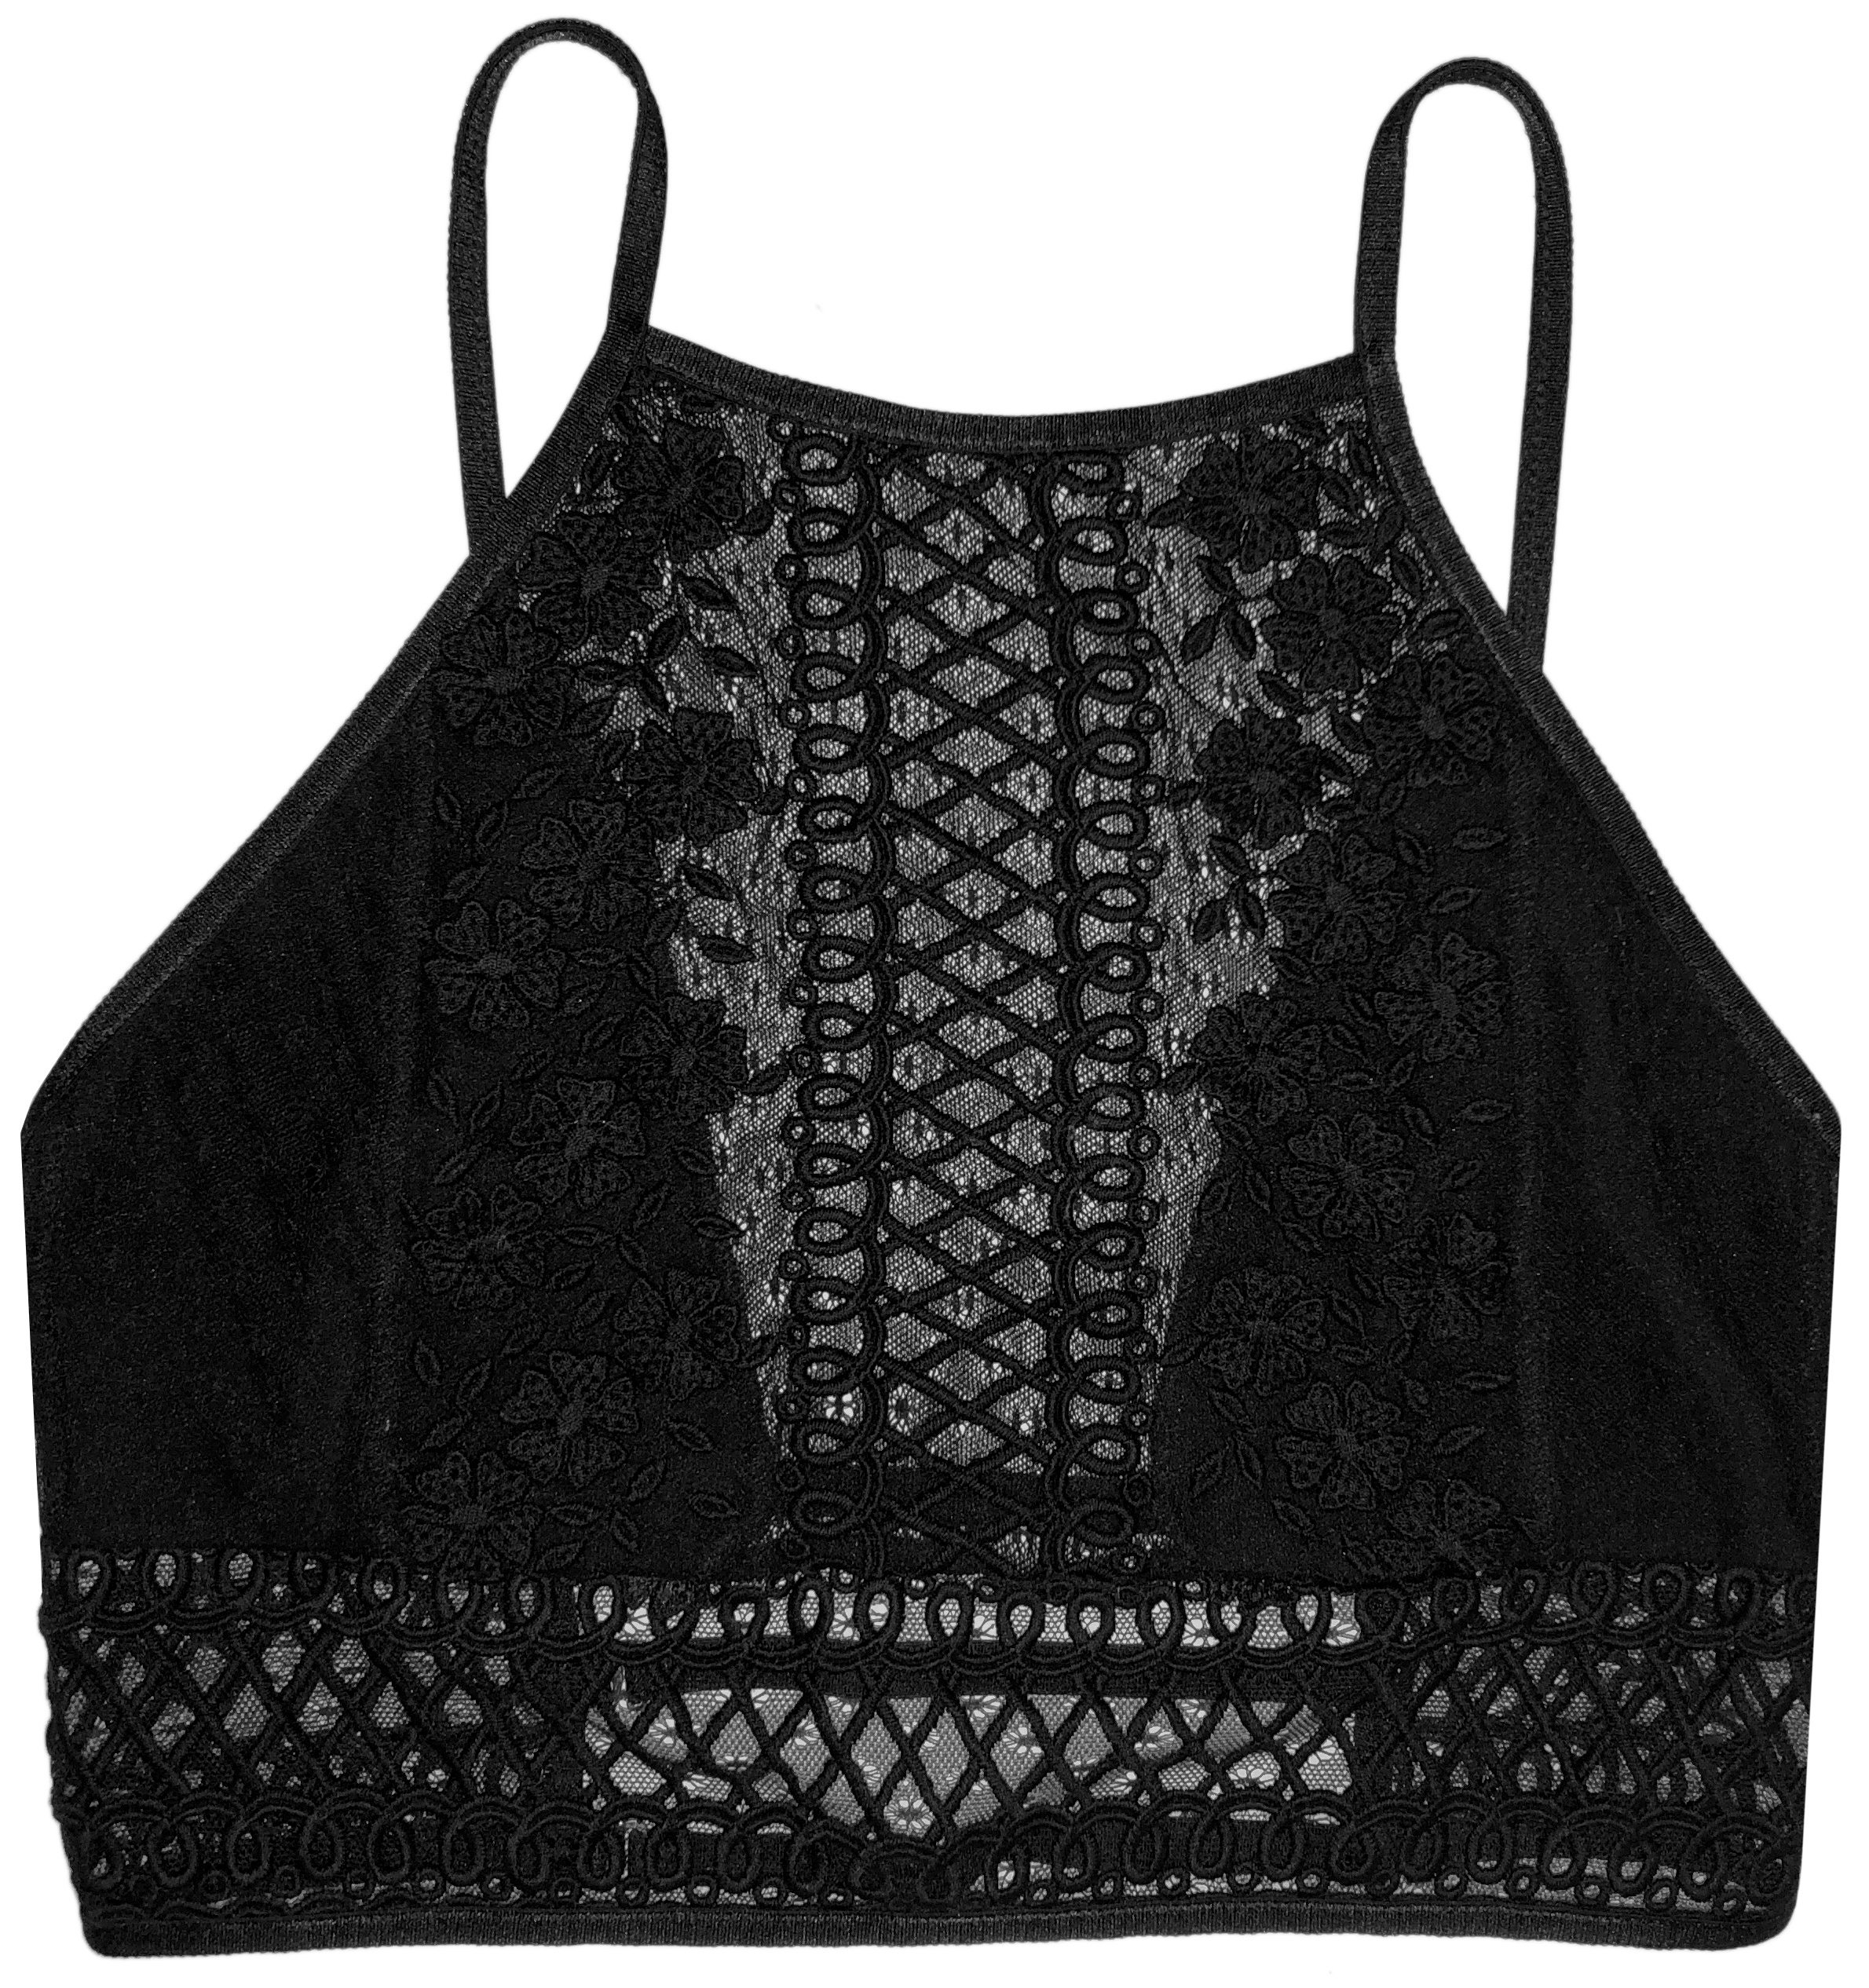 Embroidered Floral Lace Halter Bralette or Crop Top Square High